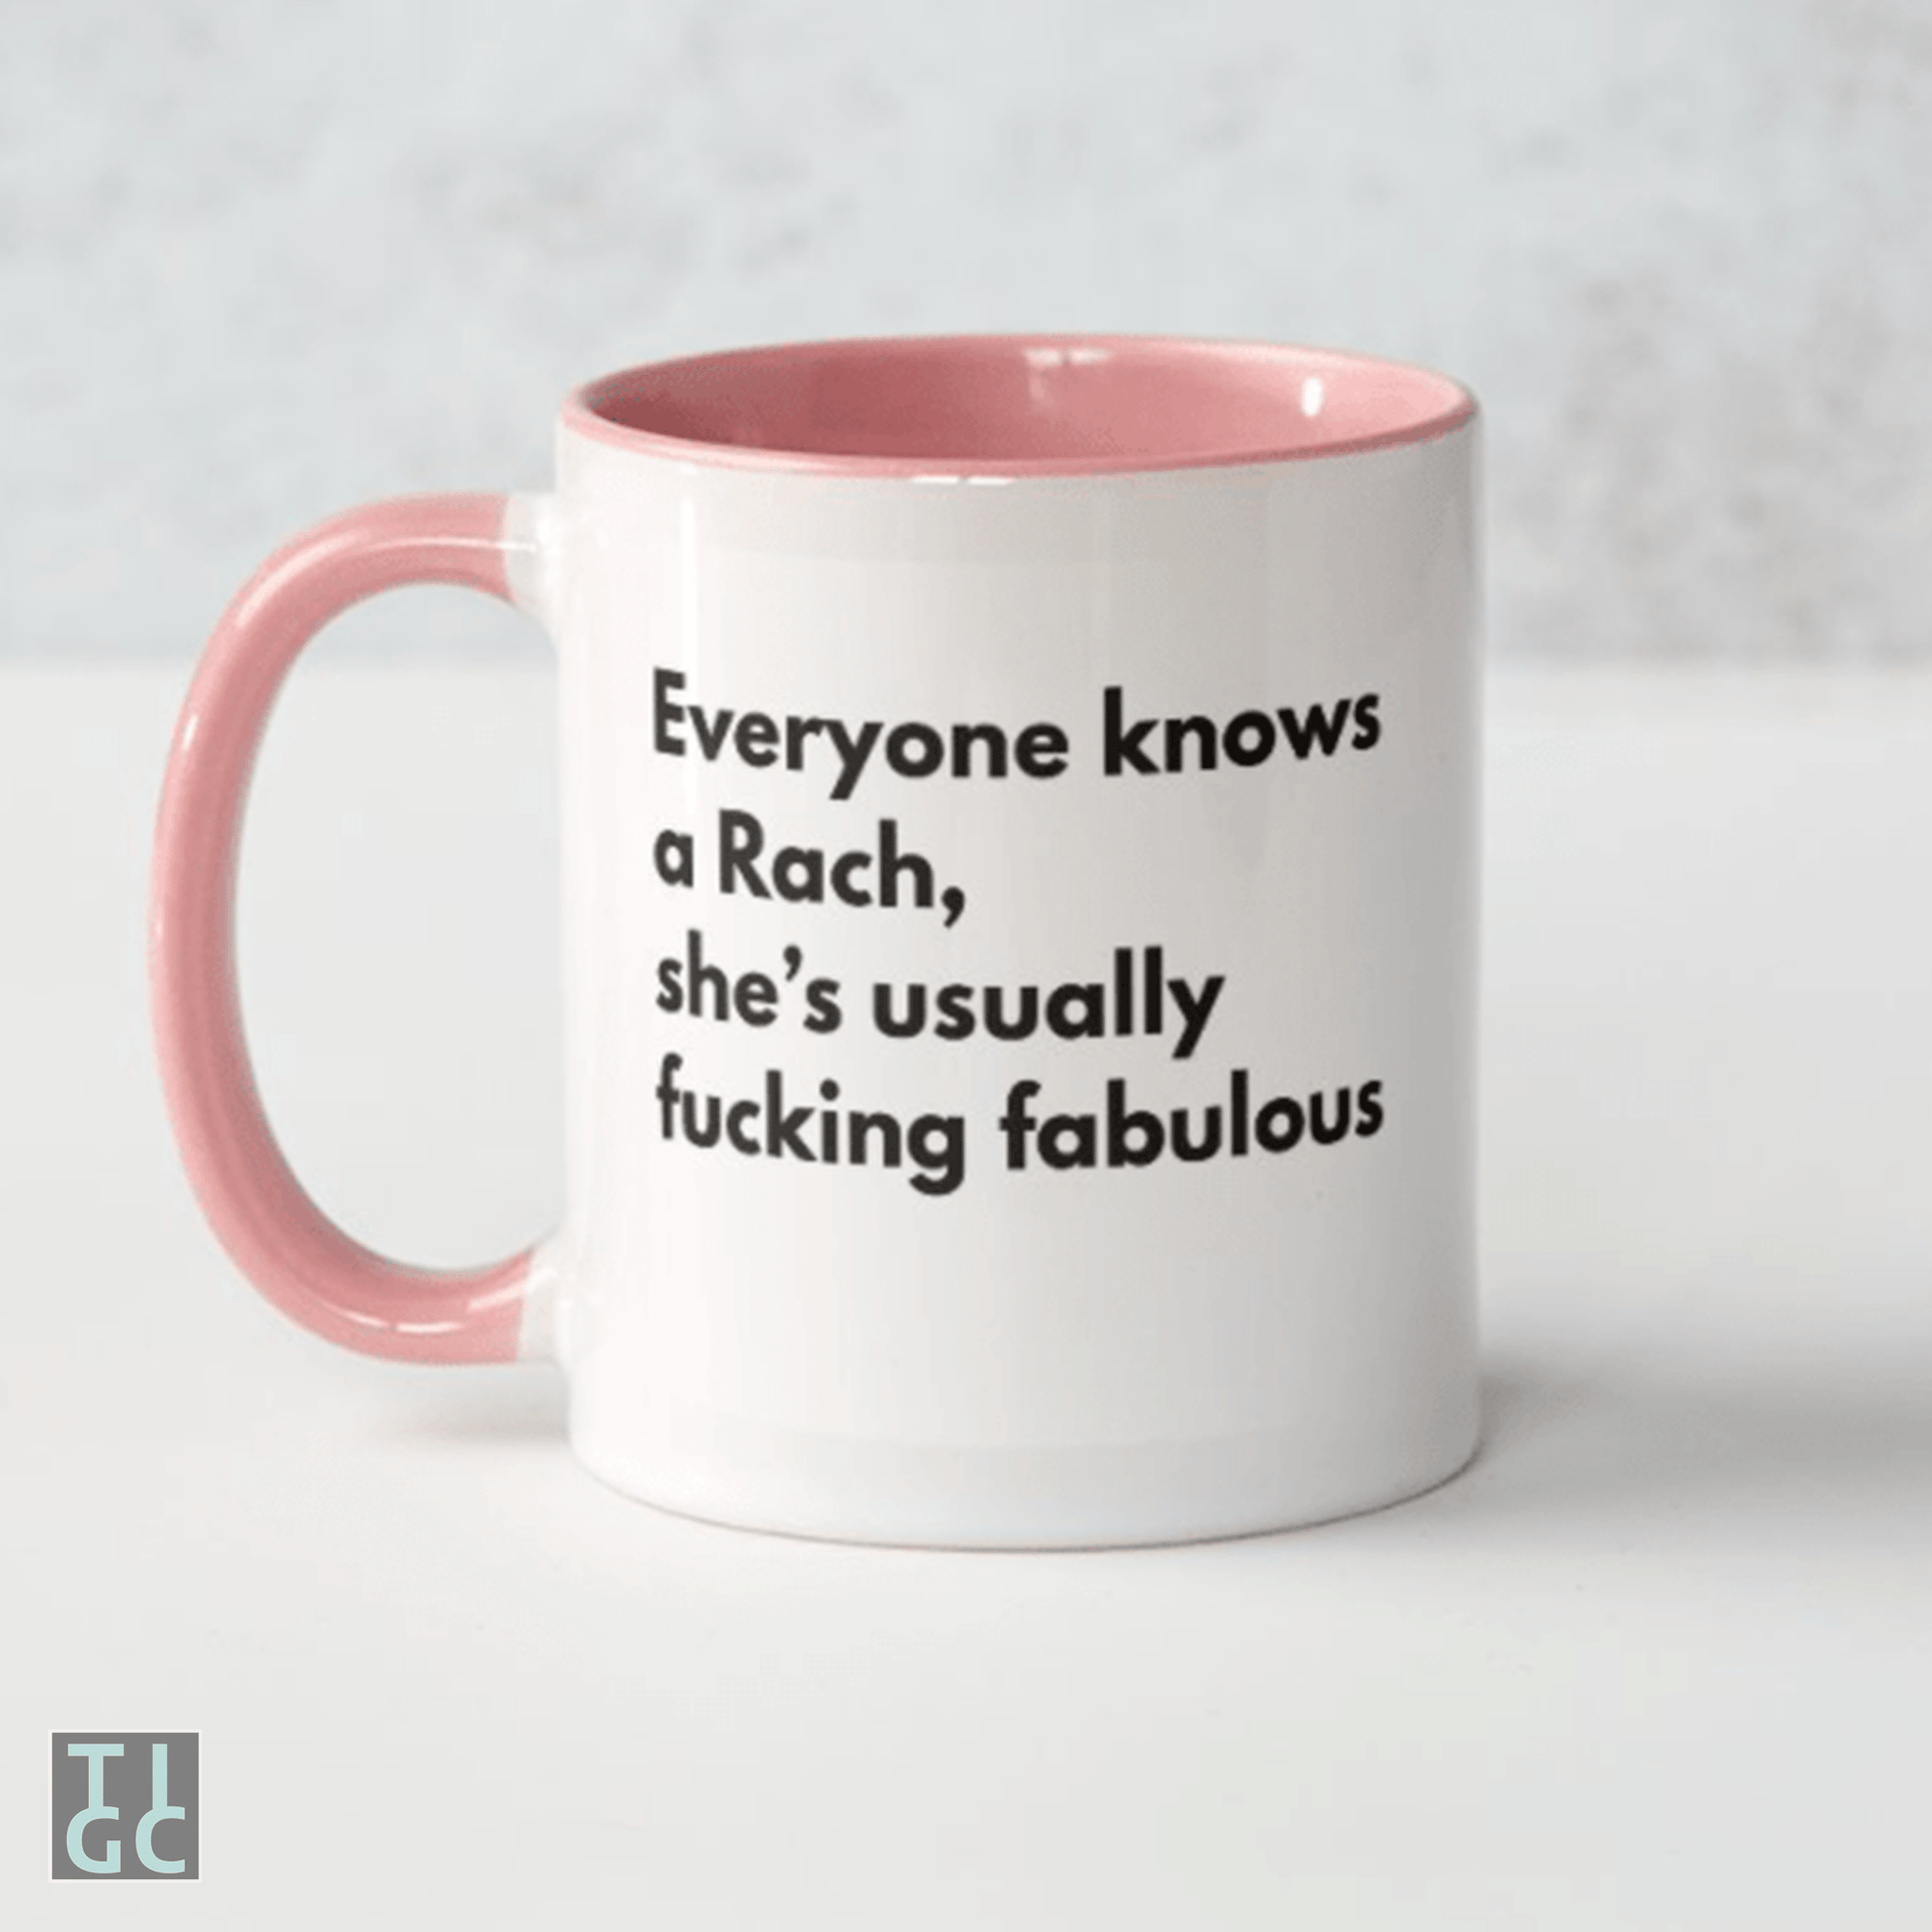 TIGC The Inappropriate Gift Co Everyone knows a Rach Mug